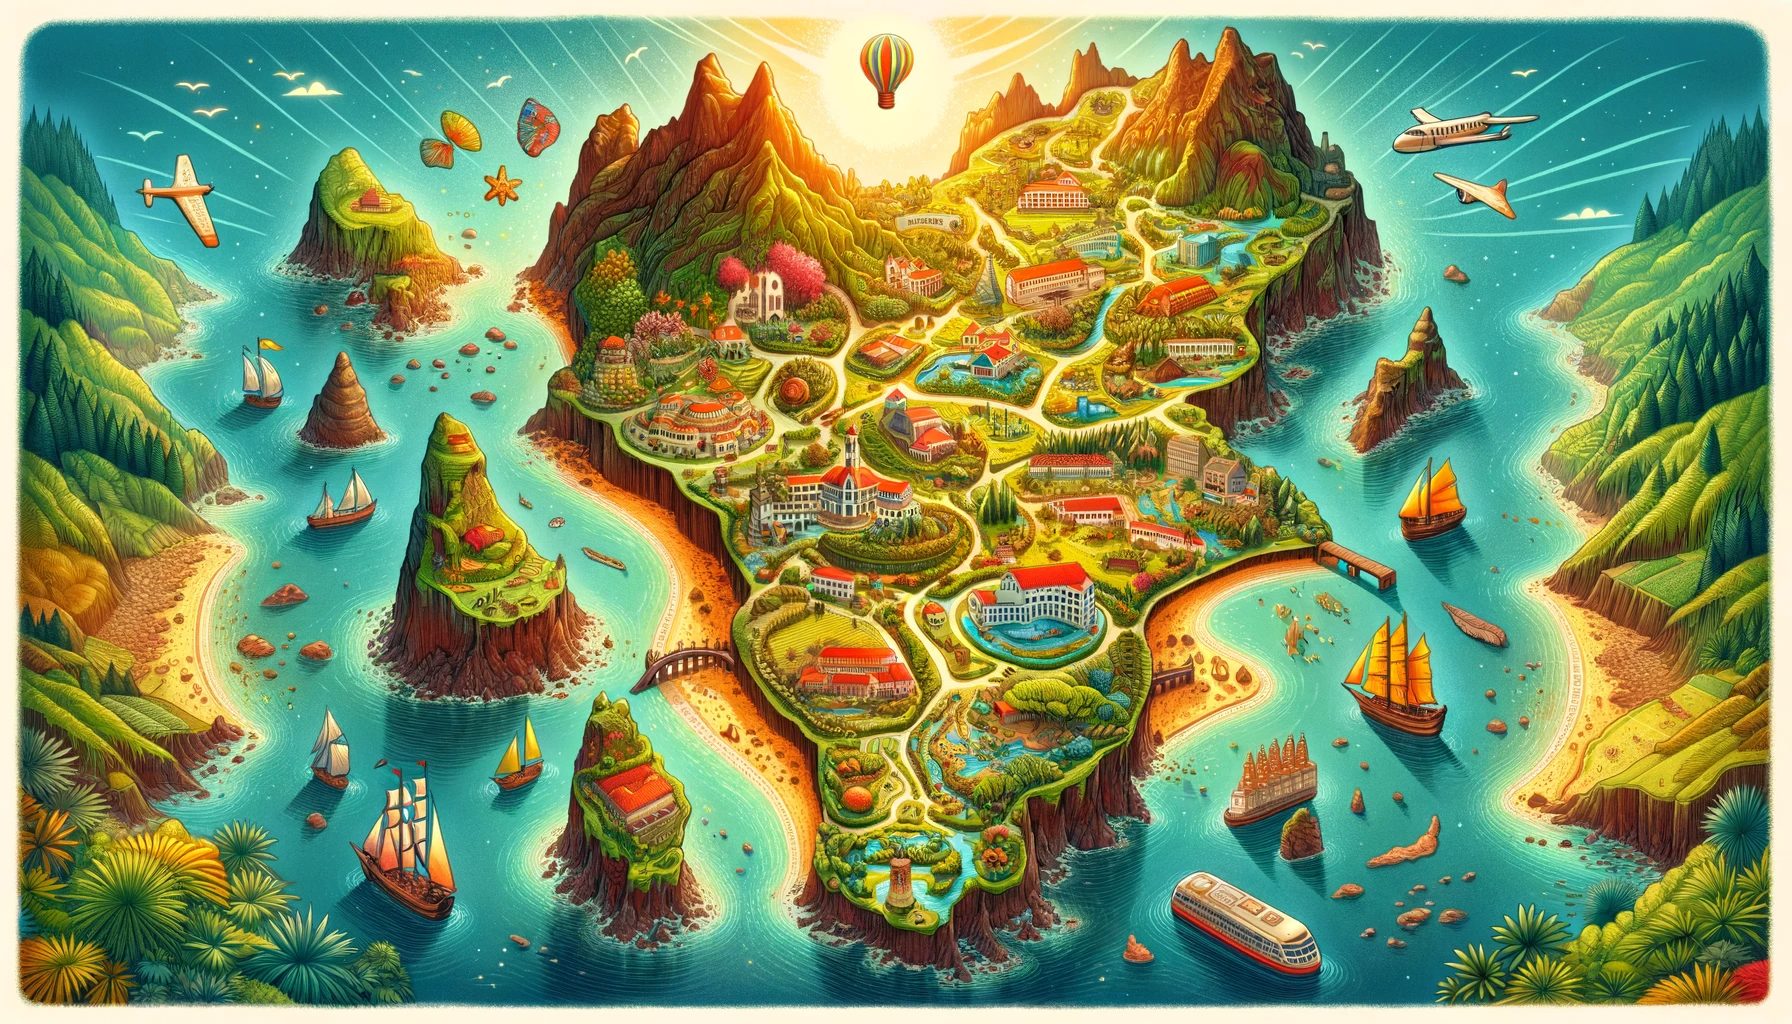 Vibrant, whimsical island illustration with vehicles and landscapes.